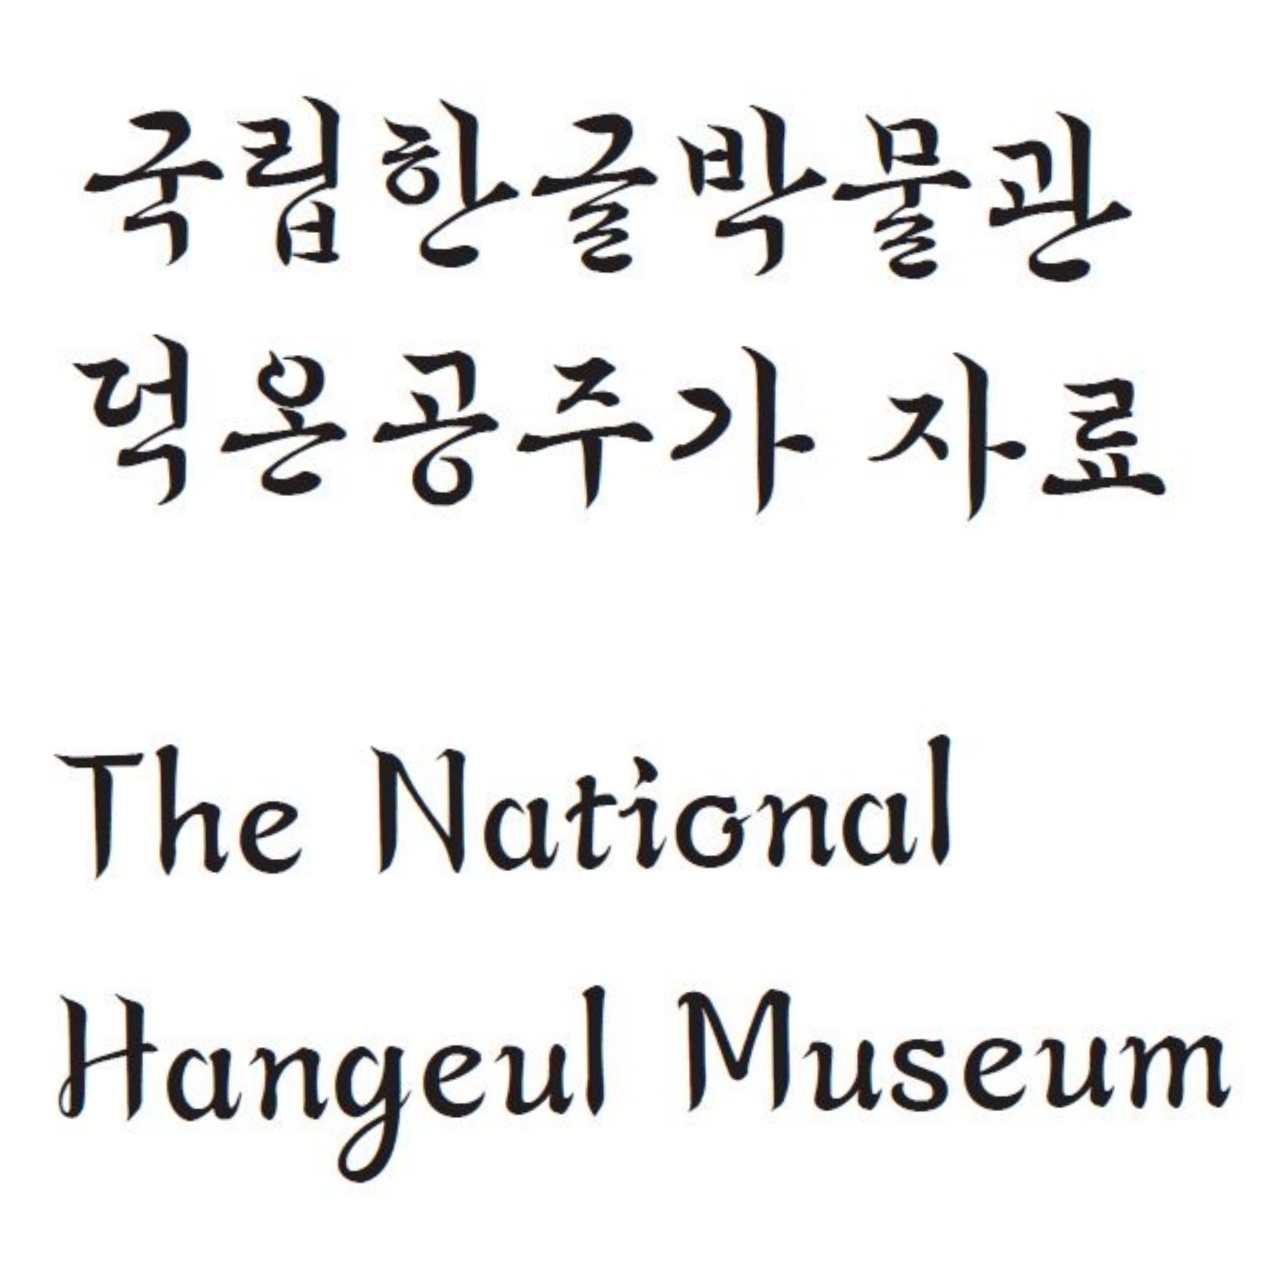 Princess Deokon Font in Hangeul and in Latin alphabet letters (National Hangeul Museum)